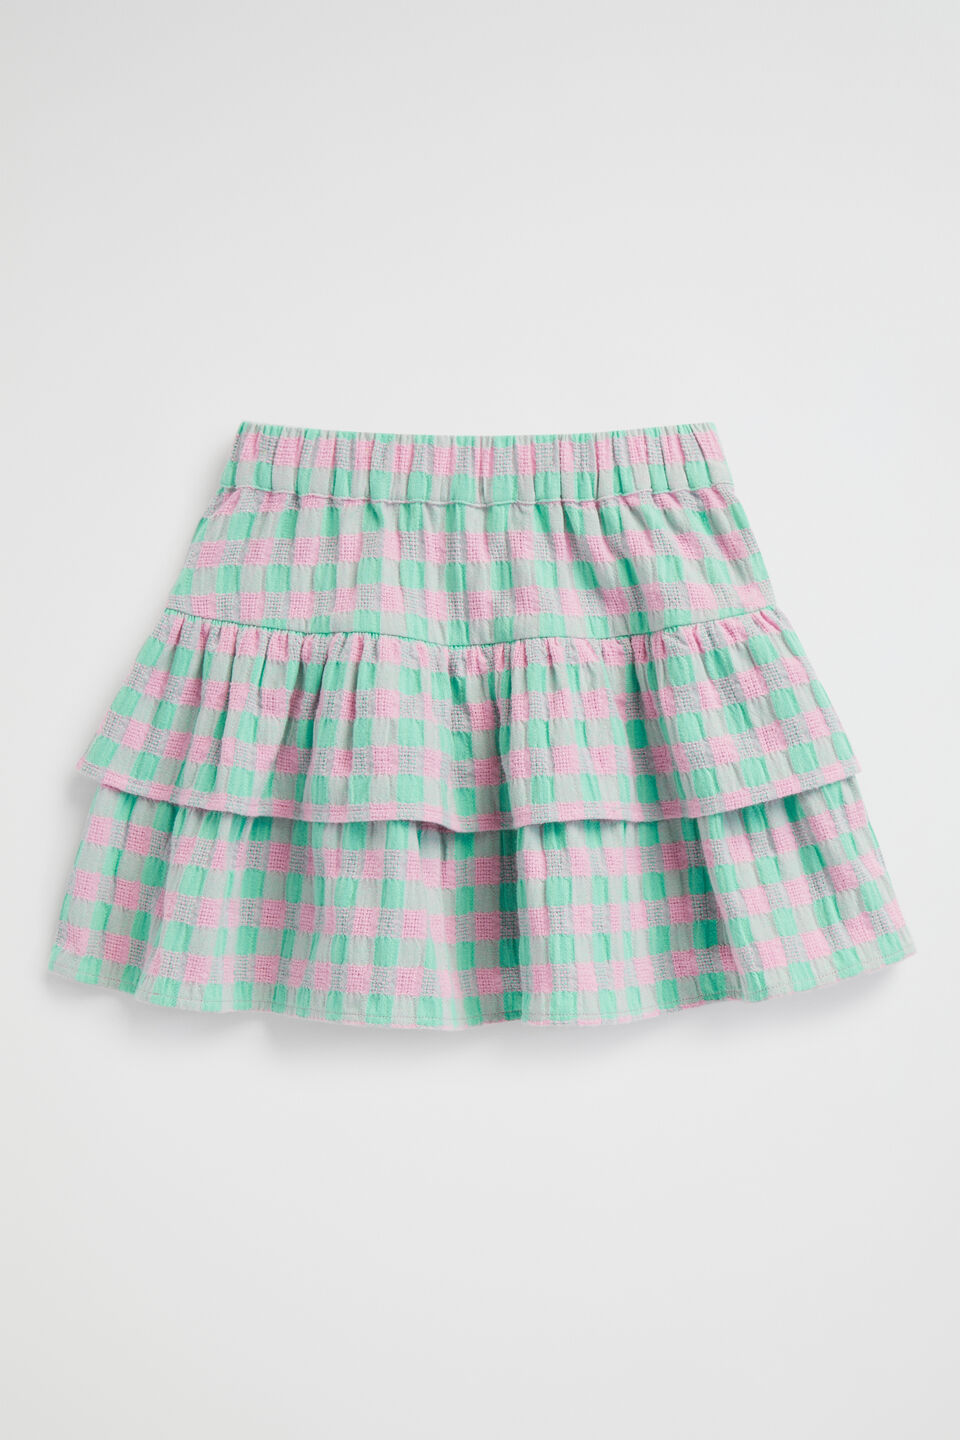 Gingham Skirt  Candy Pink